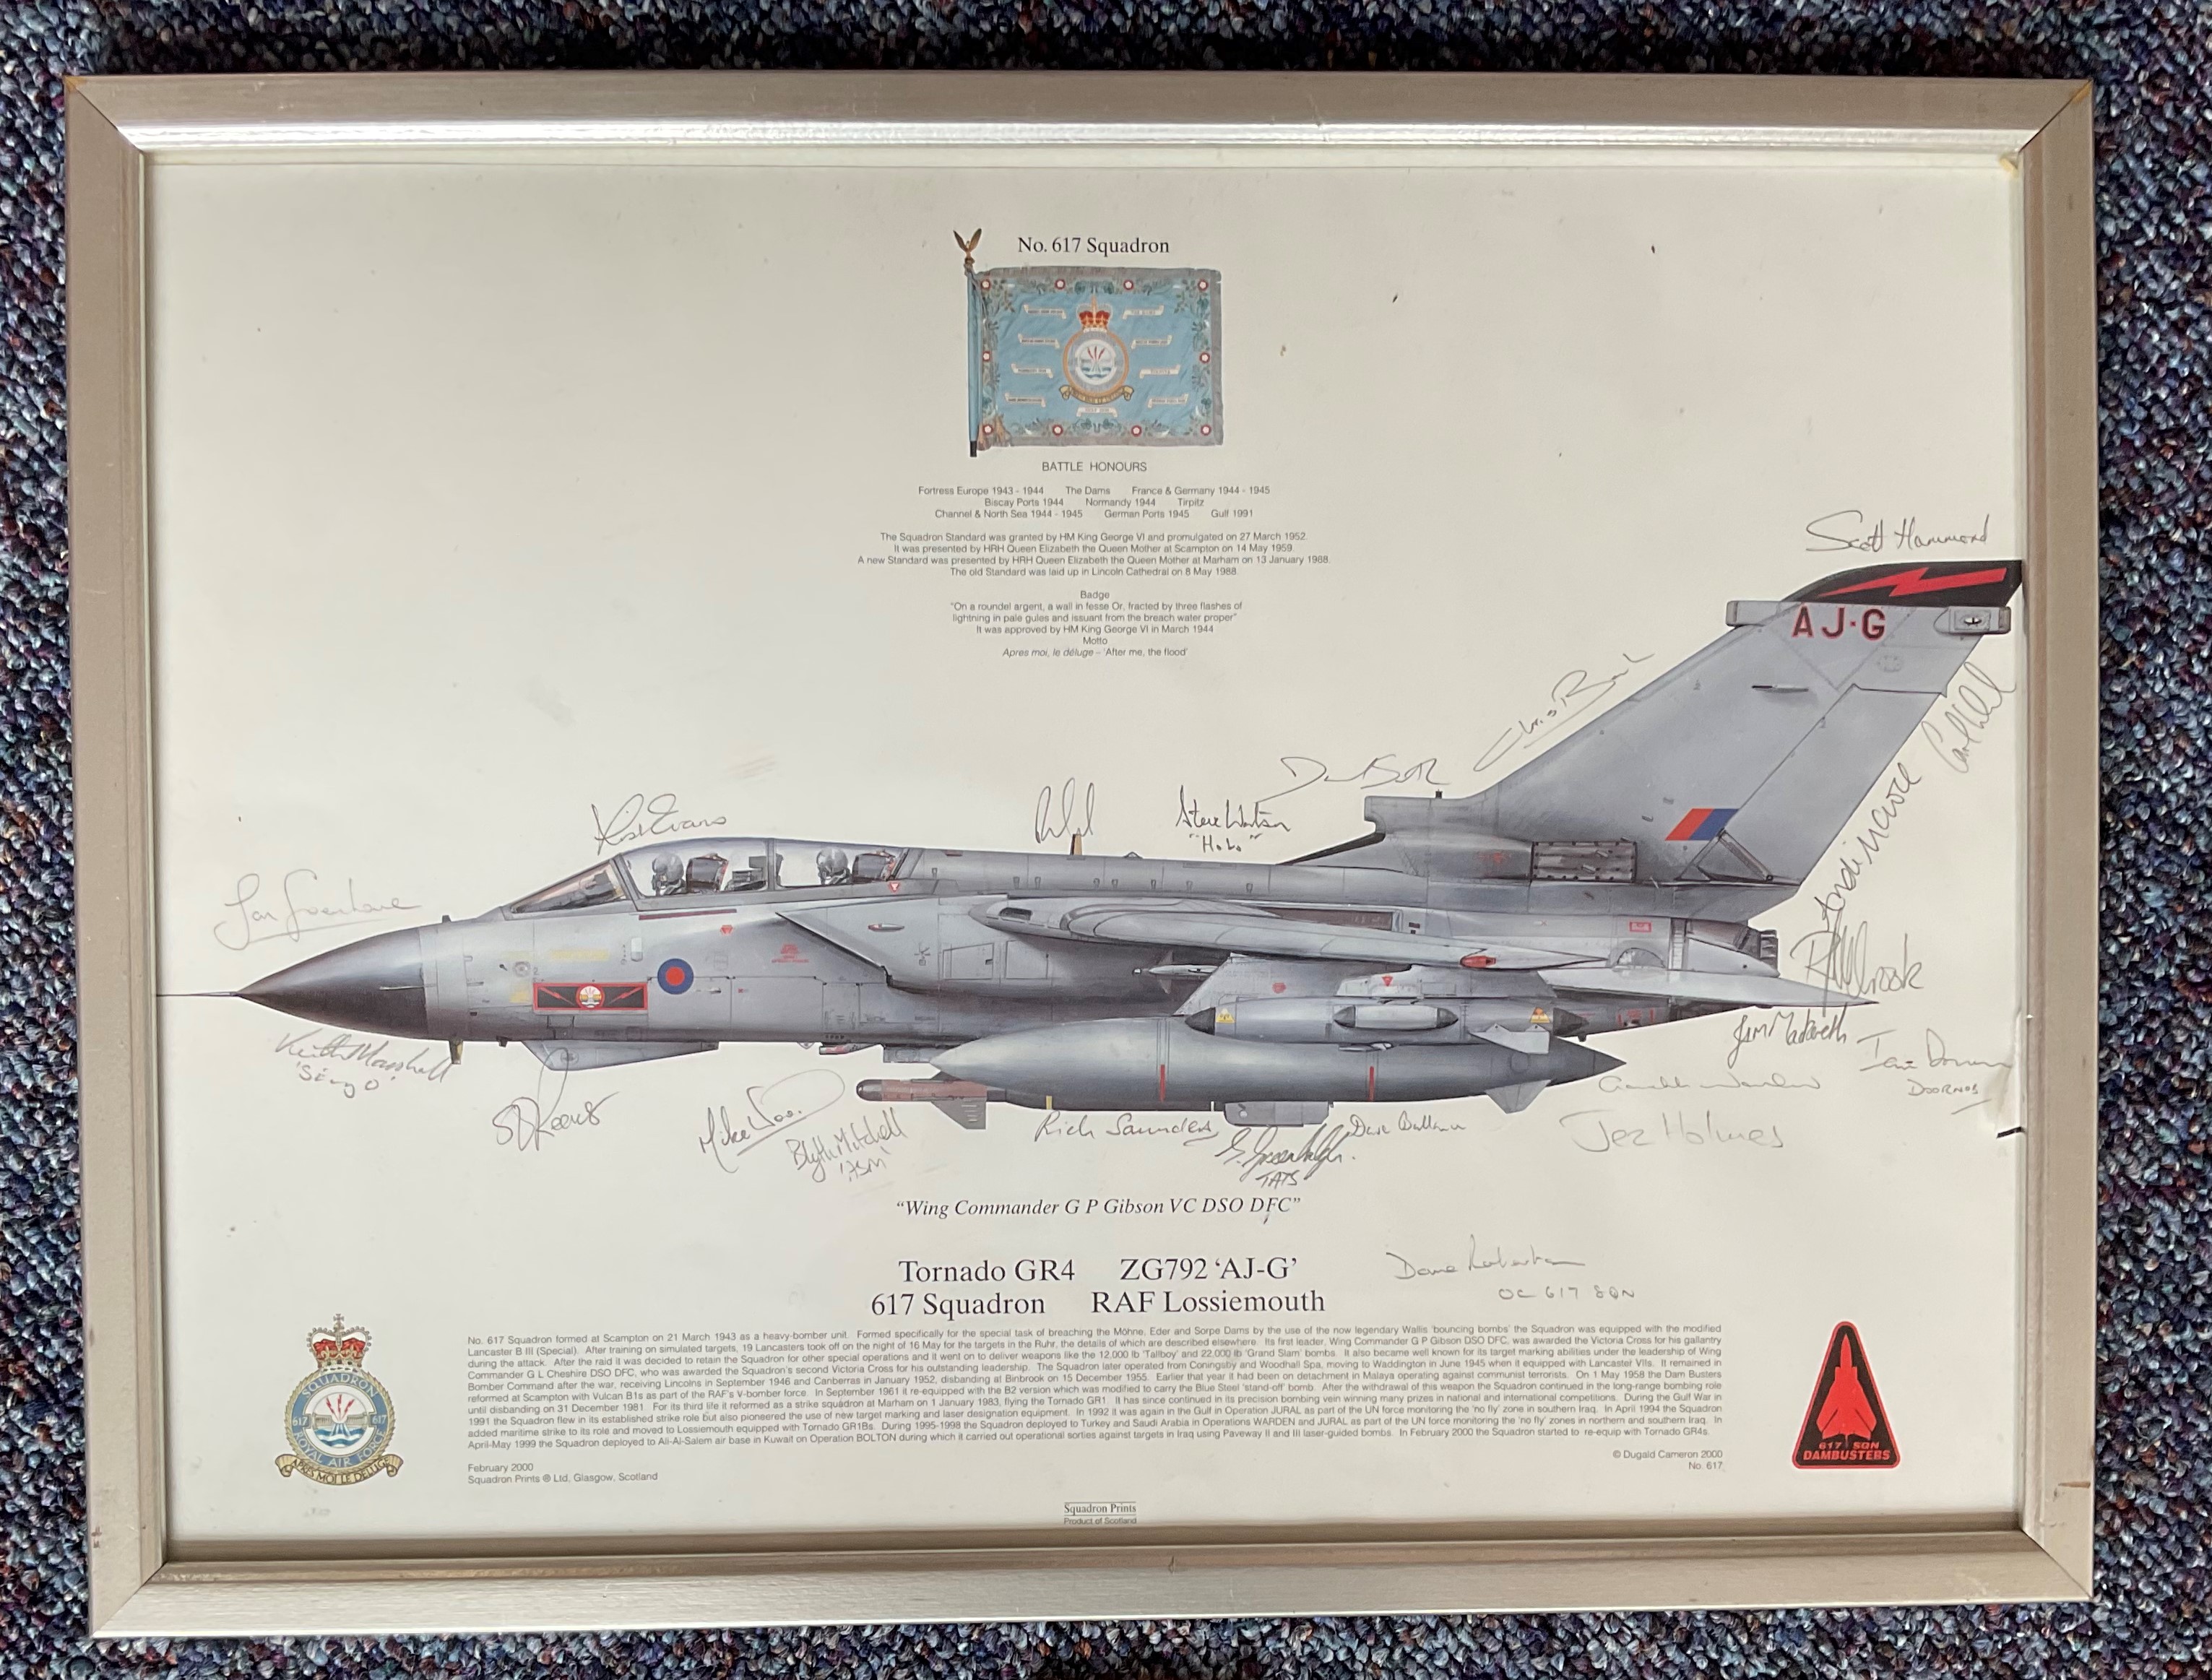 RAF 617 Squadron 13x17 framed and mounted multi signed 617 Squadron RAF Lossiemouth Tornado GR4